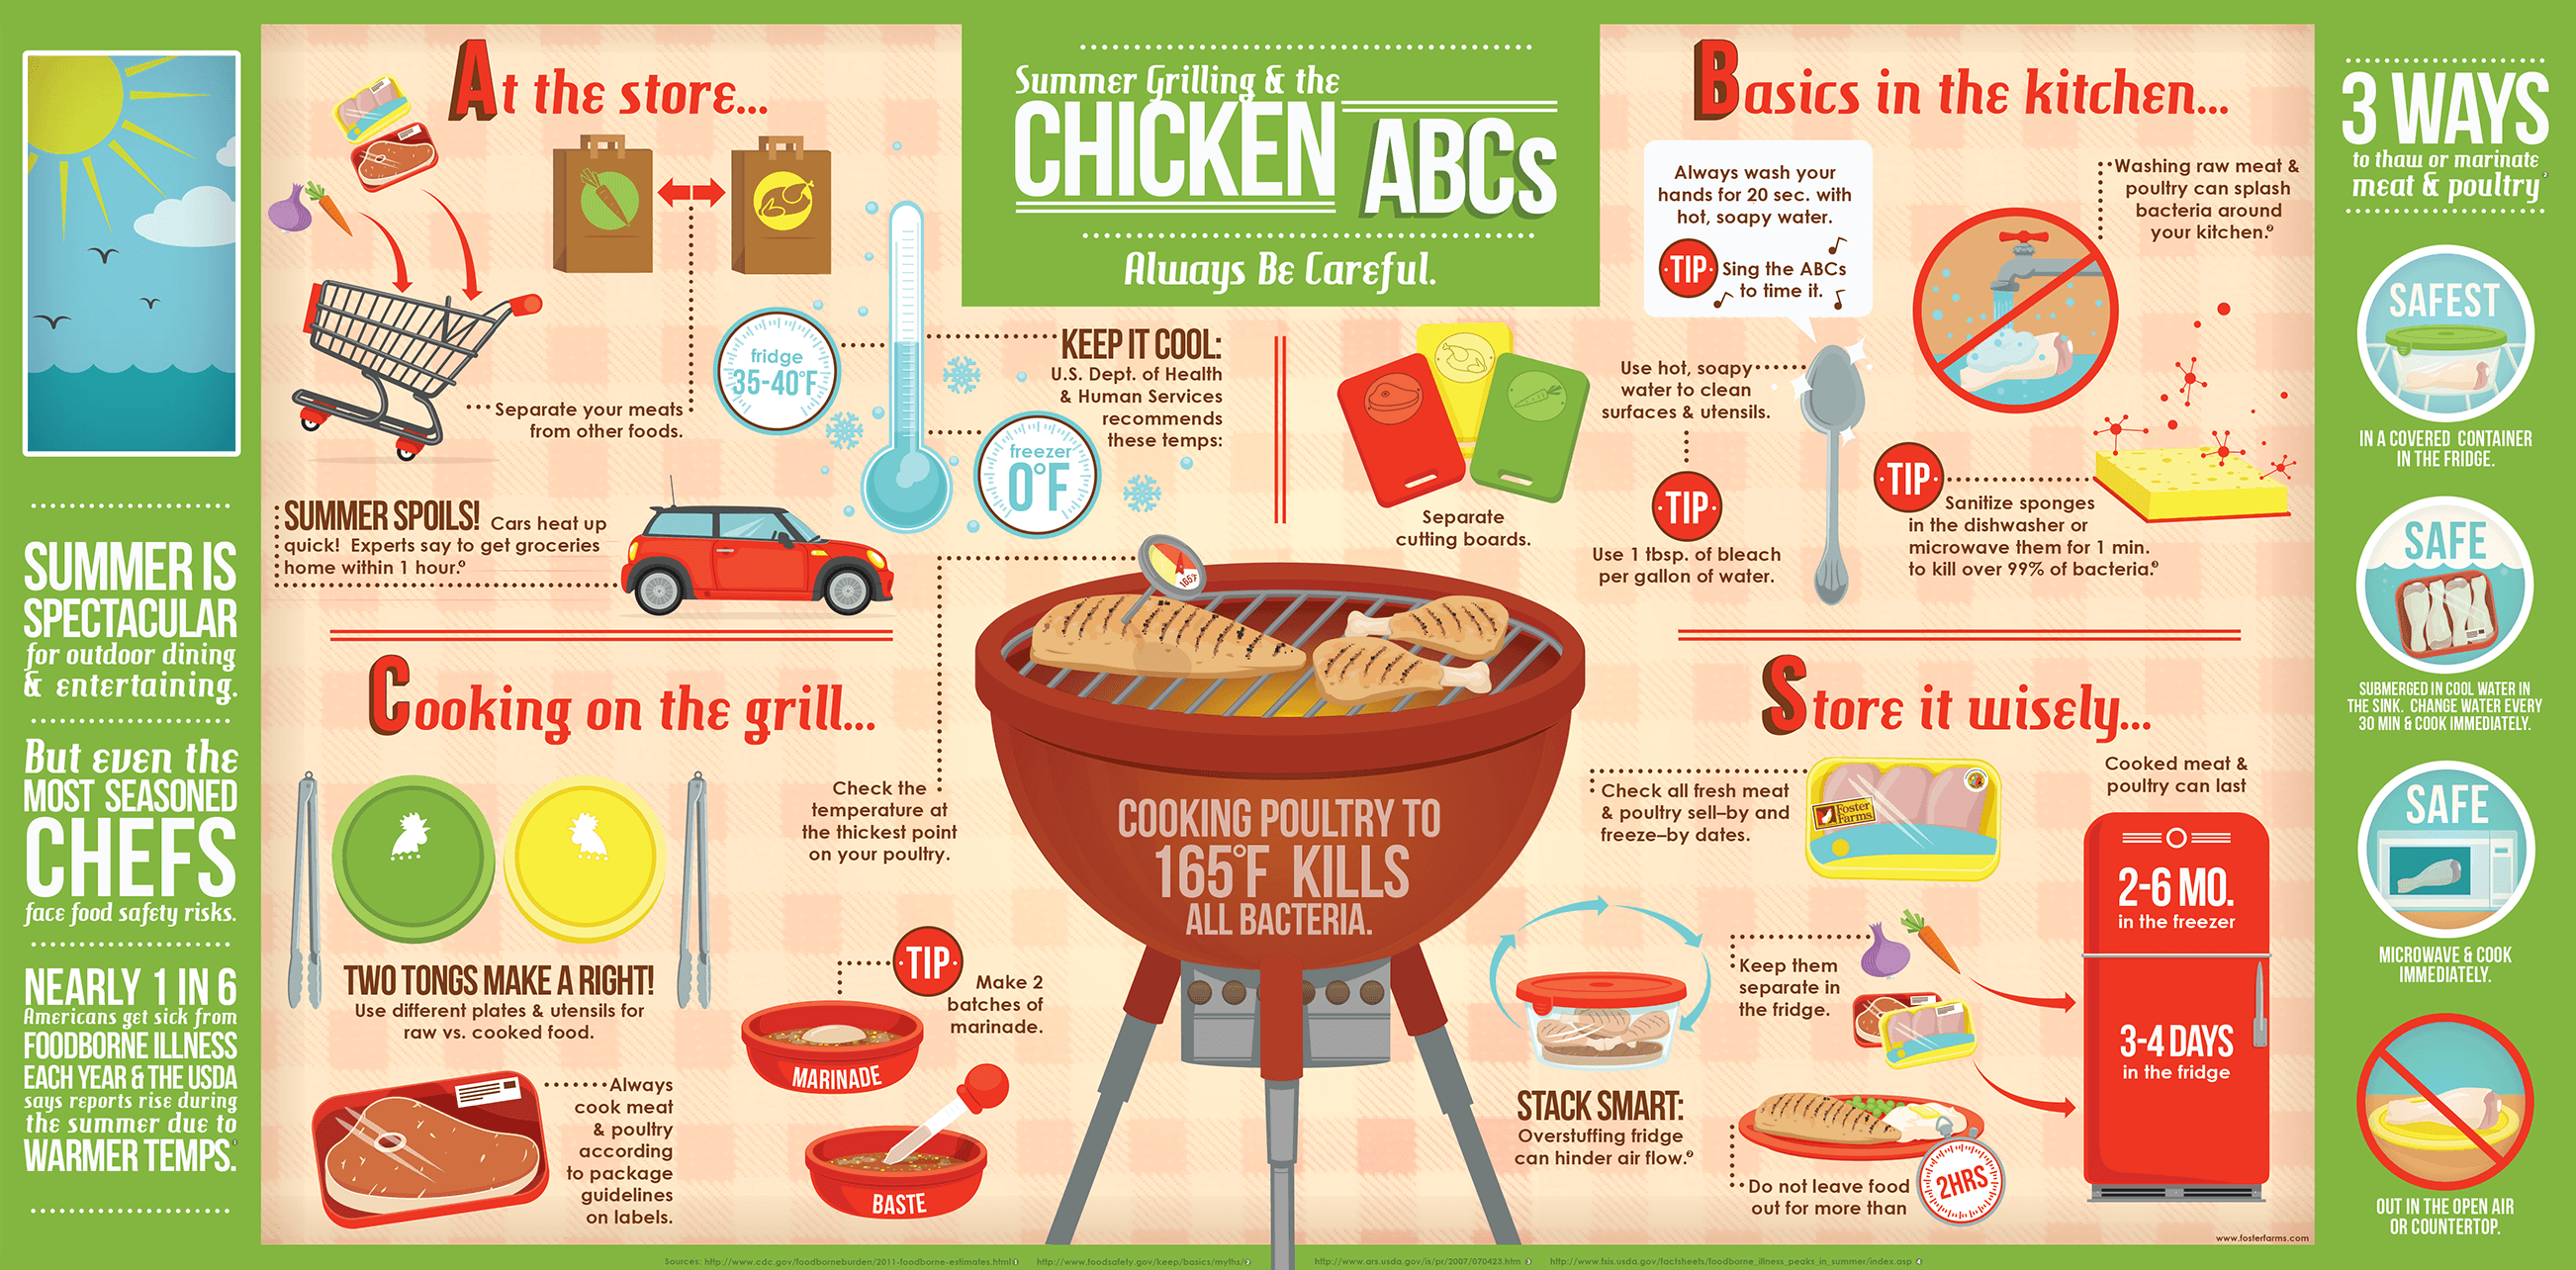 summer-grilling chicken-abcs_51bf3273111d6